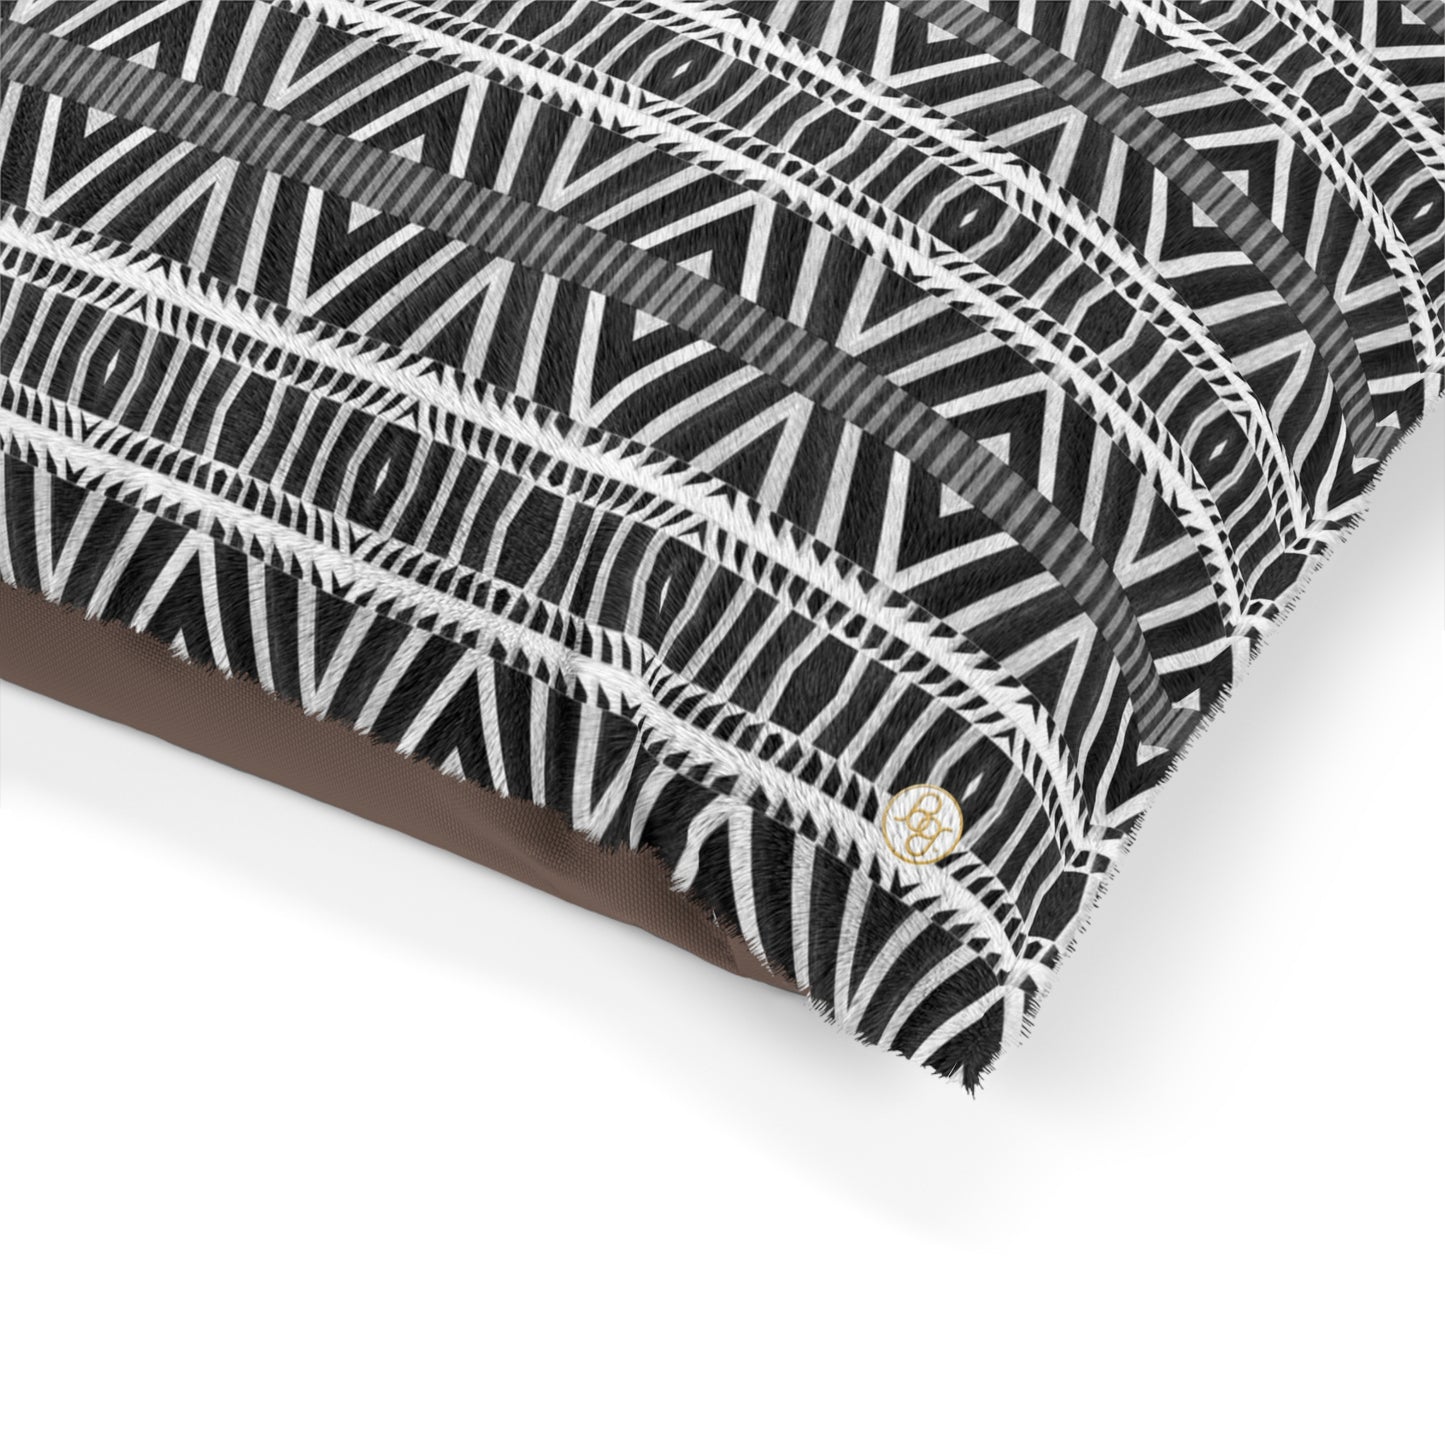 Fleece dog bed featuring an abstract black and white pattern